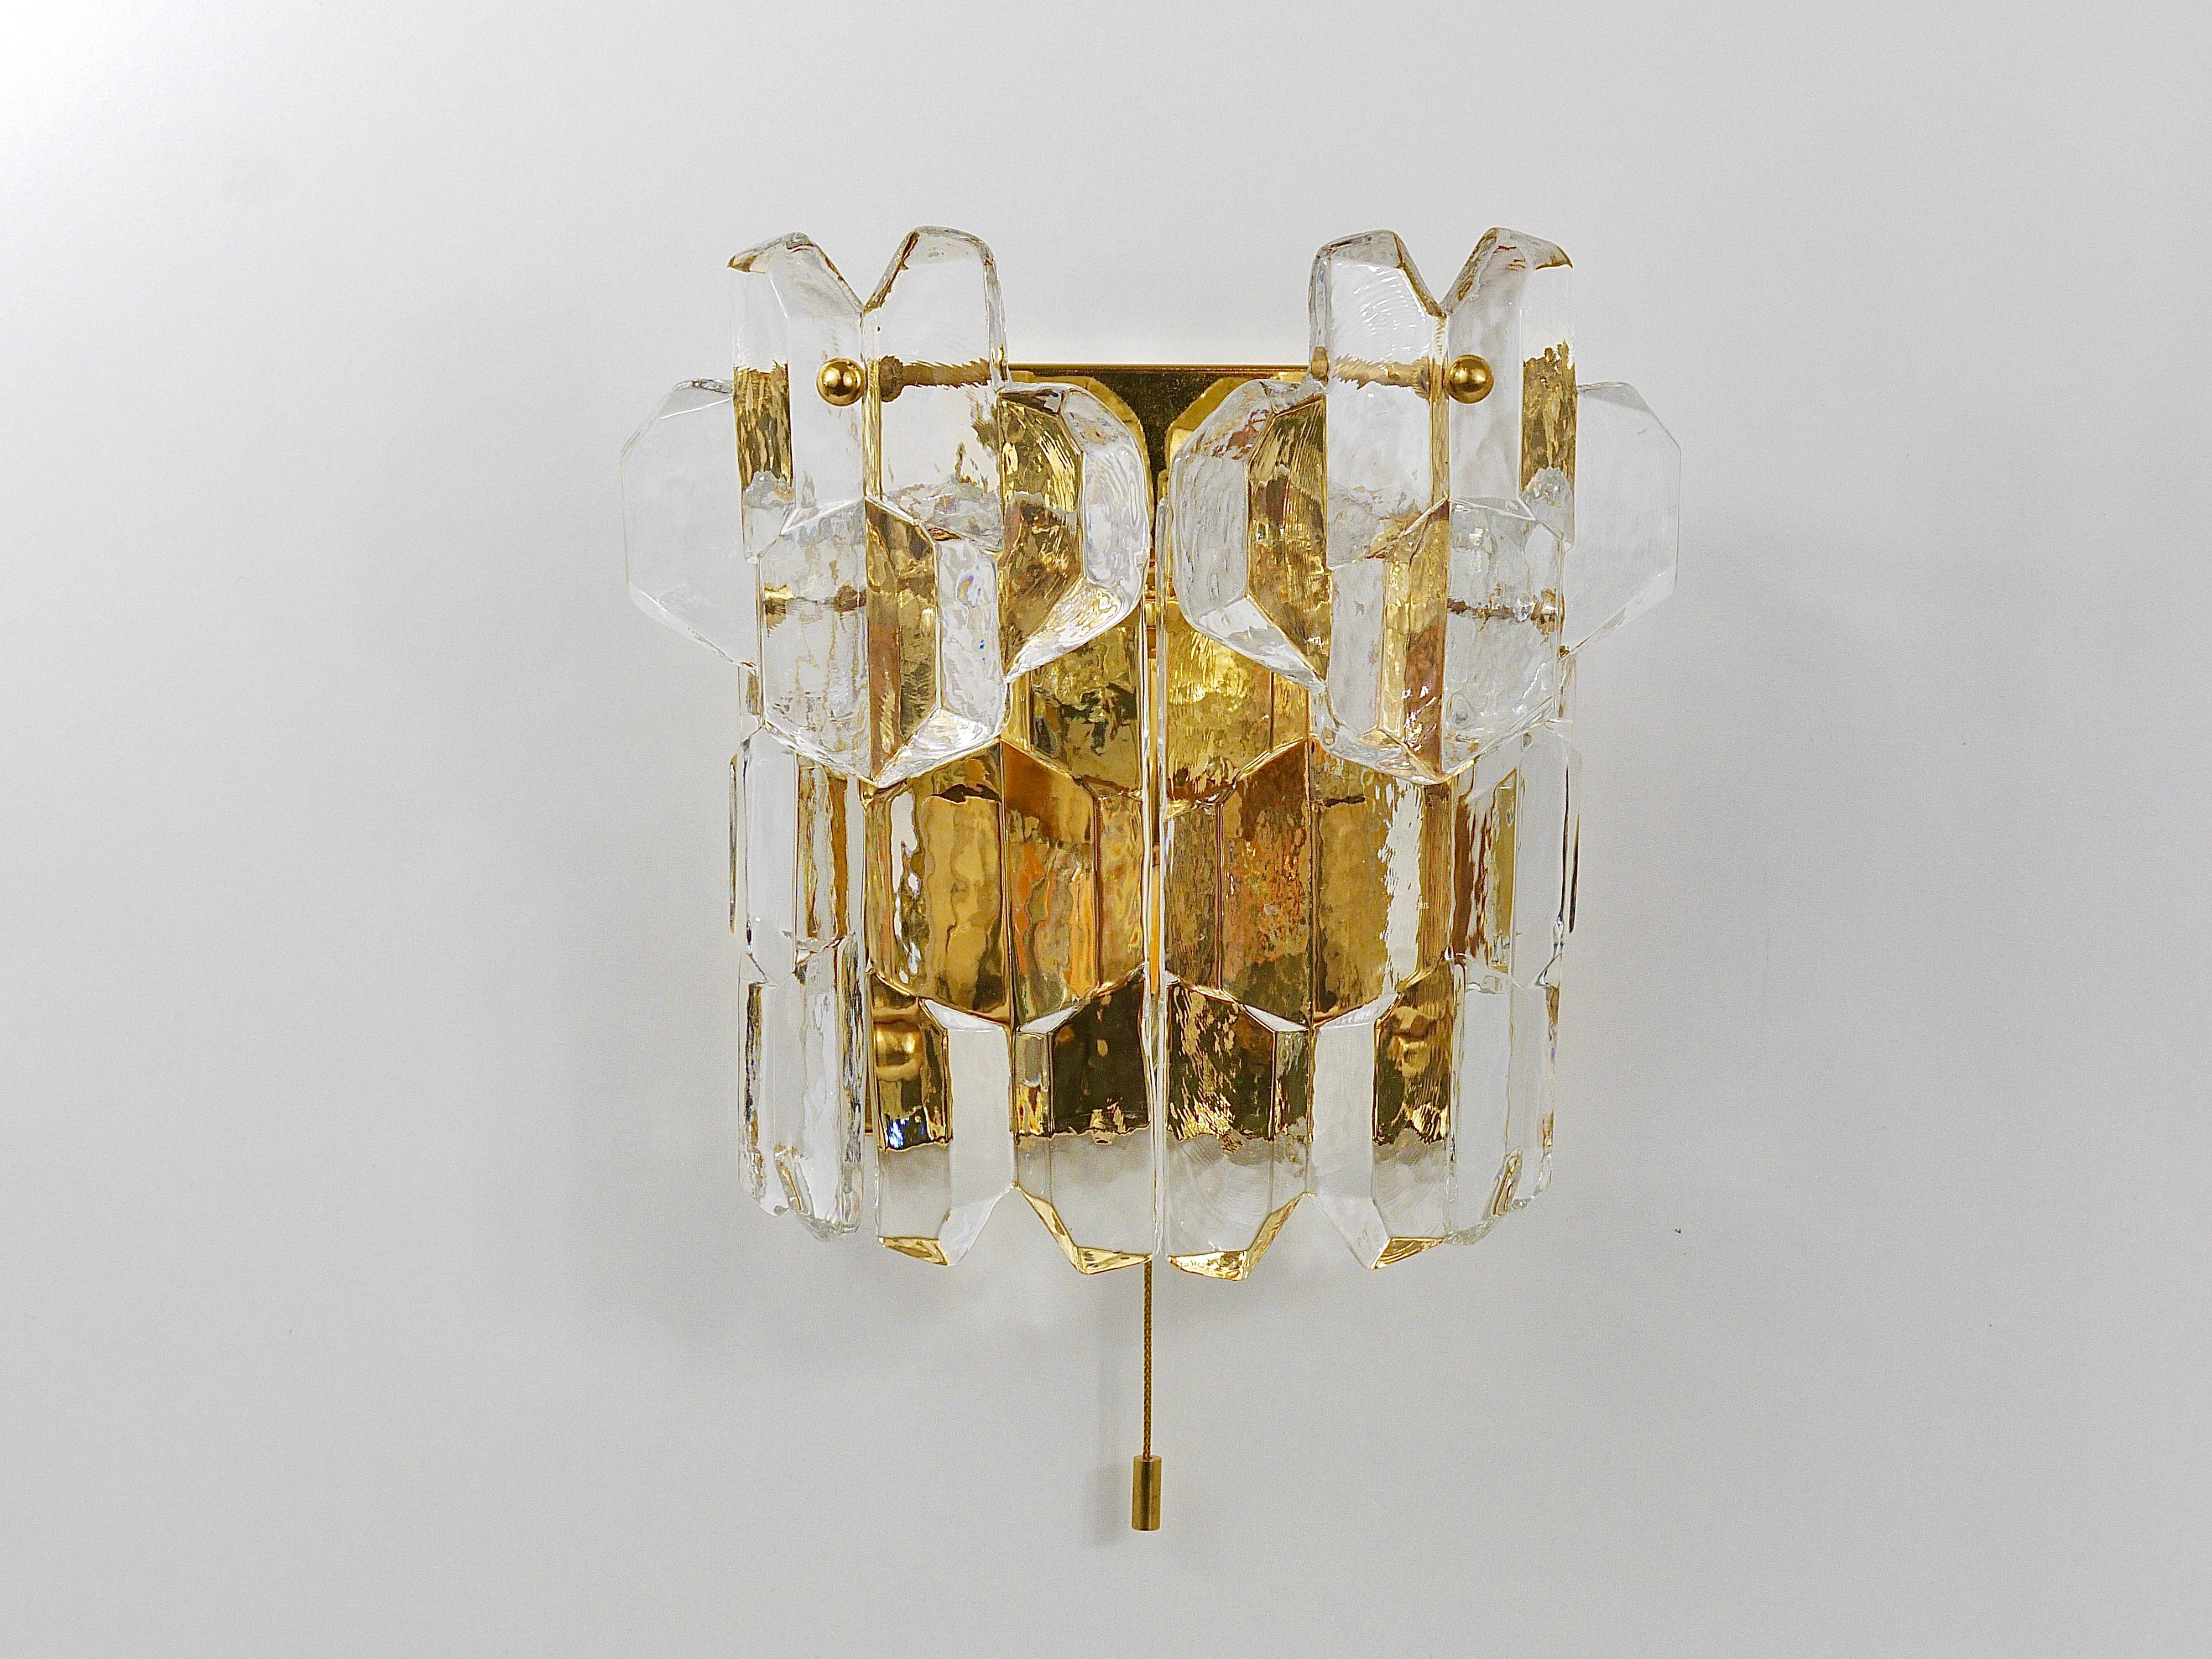 An elegant and large handmade wall light, produced by Kalmar Franken KG in the 1970s. Its frame is made of gold-plated brass and it has two layers of solid polished ice glass crystal glasses. The wall light offers three lights sources and has an